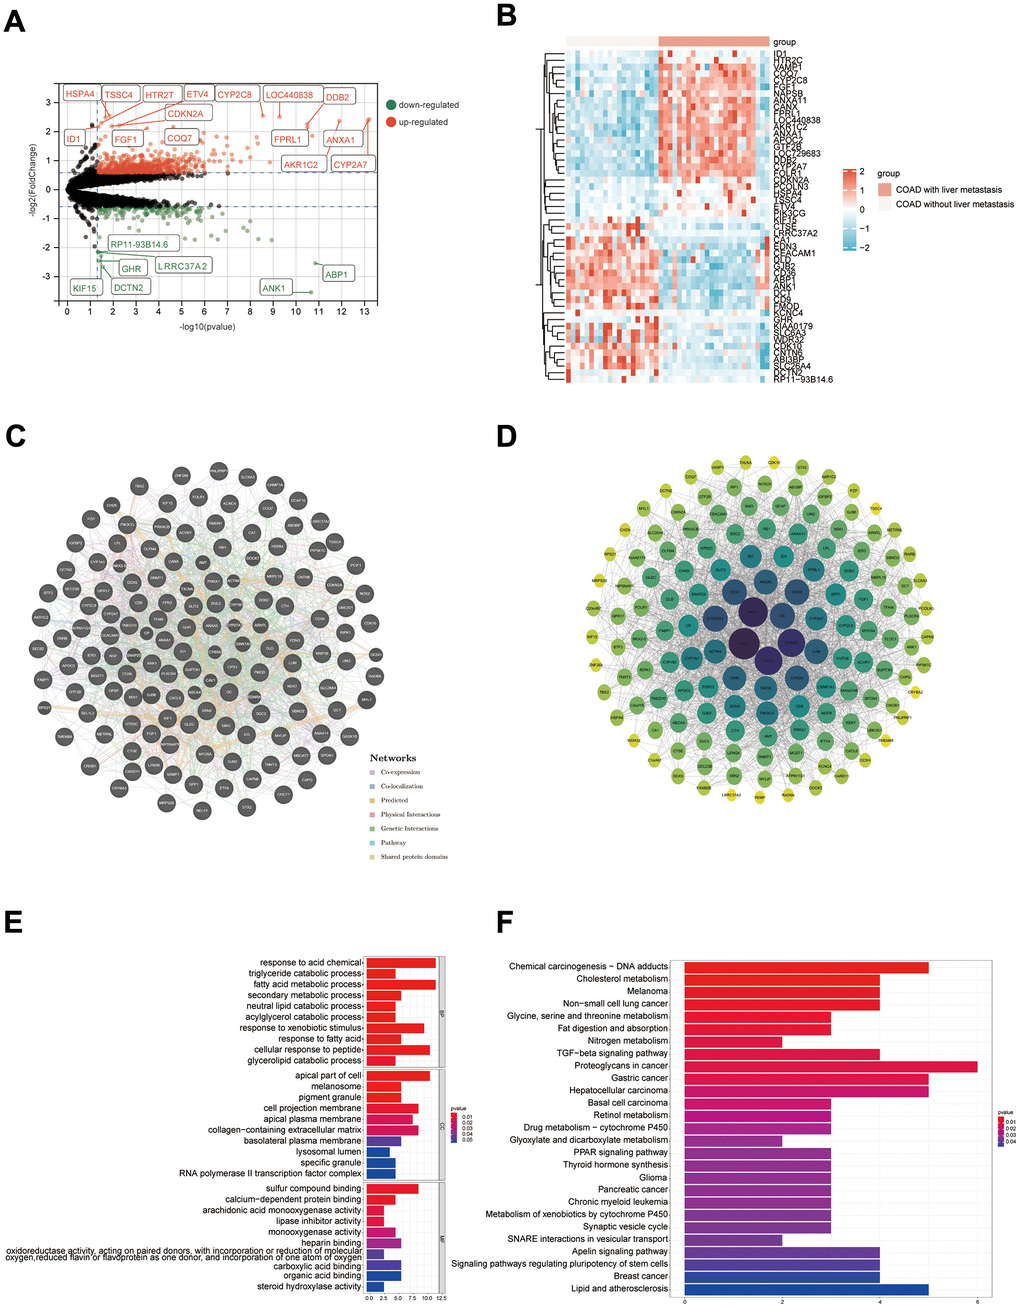 Results of bioinformatics analysis of potential mechanisms for developing liver metastasis in COAD. (A) Volcano map; (B) Heat map (only the top 25 highly and lowly expressed genes are shown); (C, D) PPI networks were constructed from the GeneMANIA database and Cytoscape software, respectively; (E, F) Results of GO and KEGG enrichment analysis, respectively.